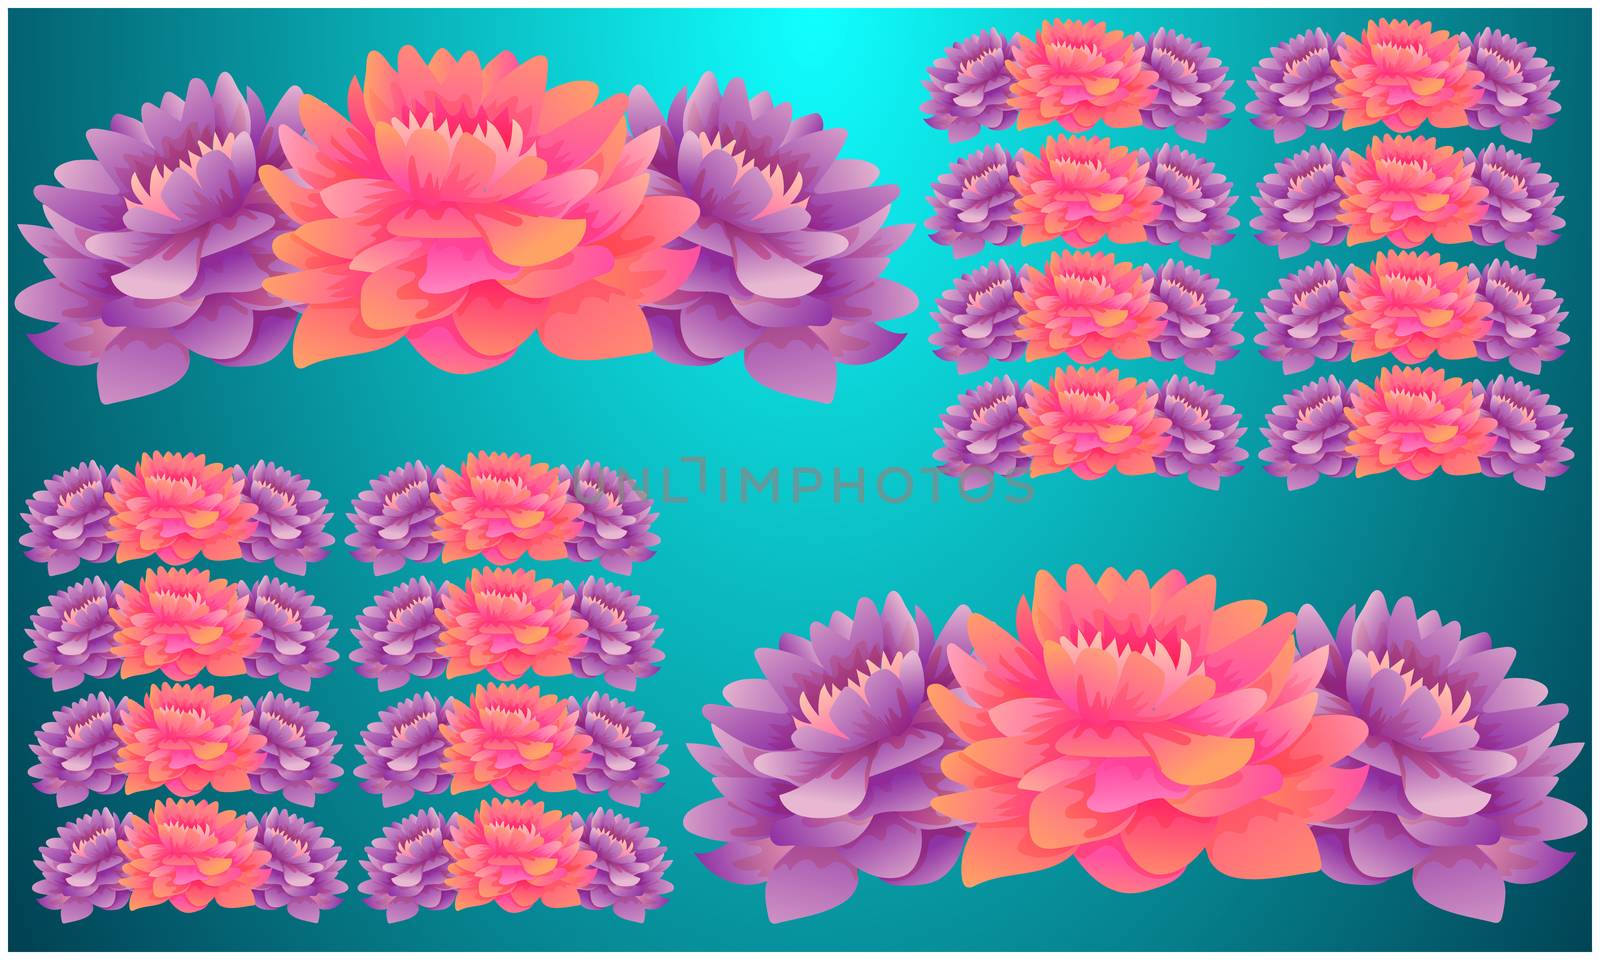 Digital Textile design of flowers on abstract backgrounds